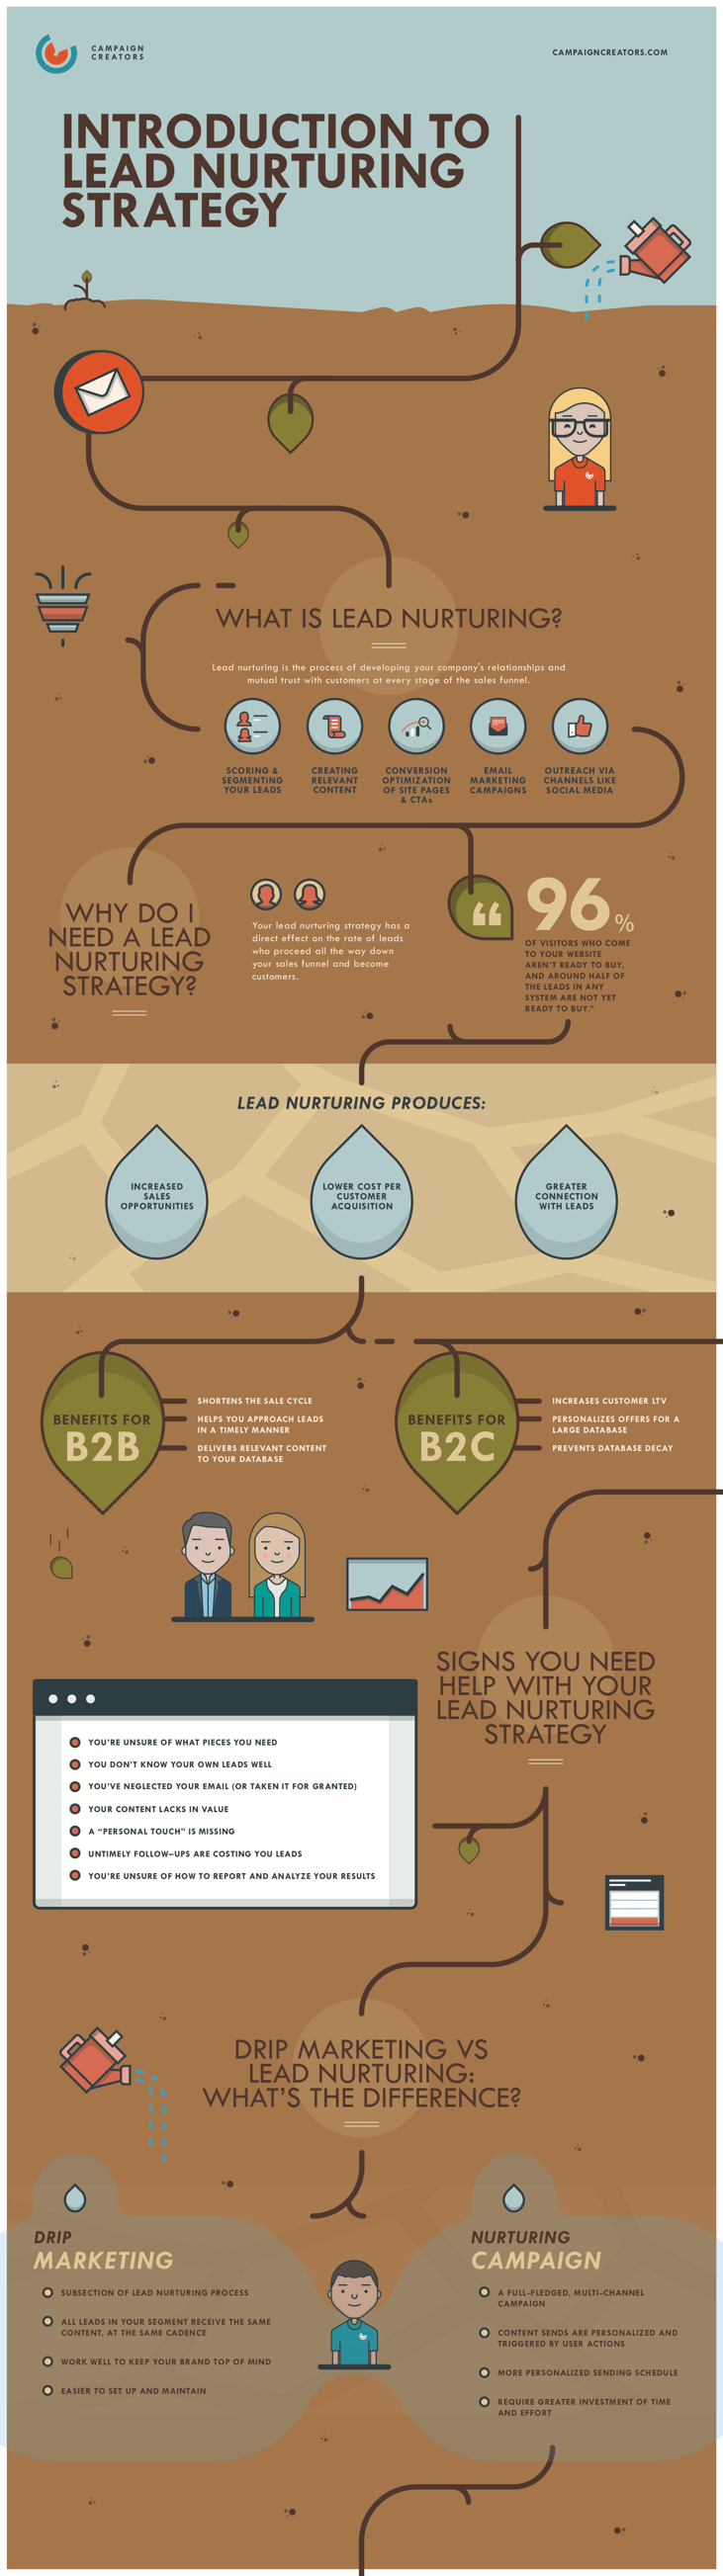 CC - Lead Nurturing Strategy - Lesson 1 Infographic